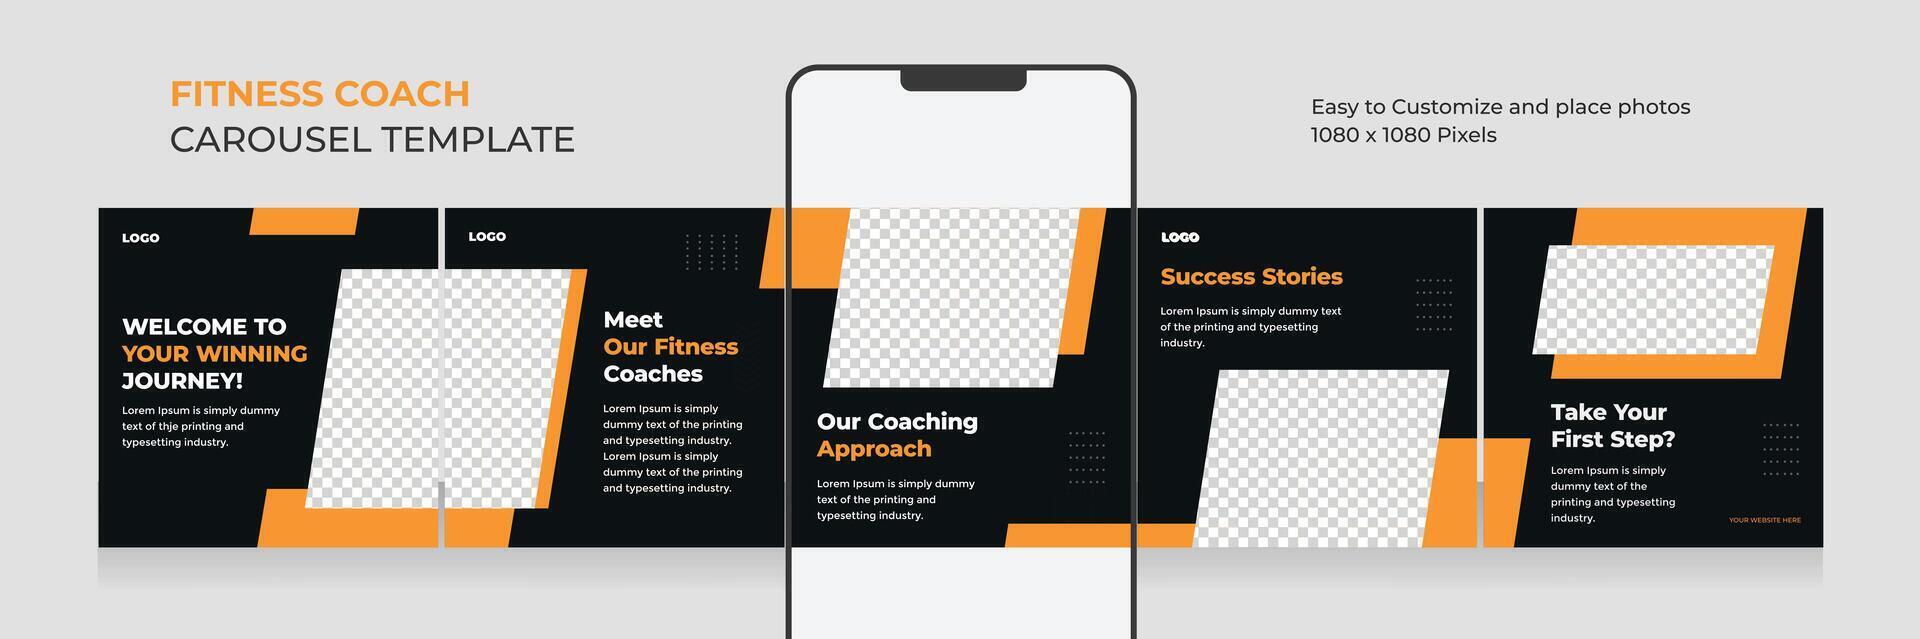 fitness and health social media carousel, carousel template for personal fitness coach, EPS vector illustration.